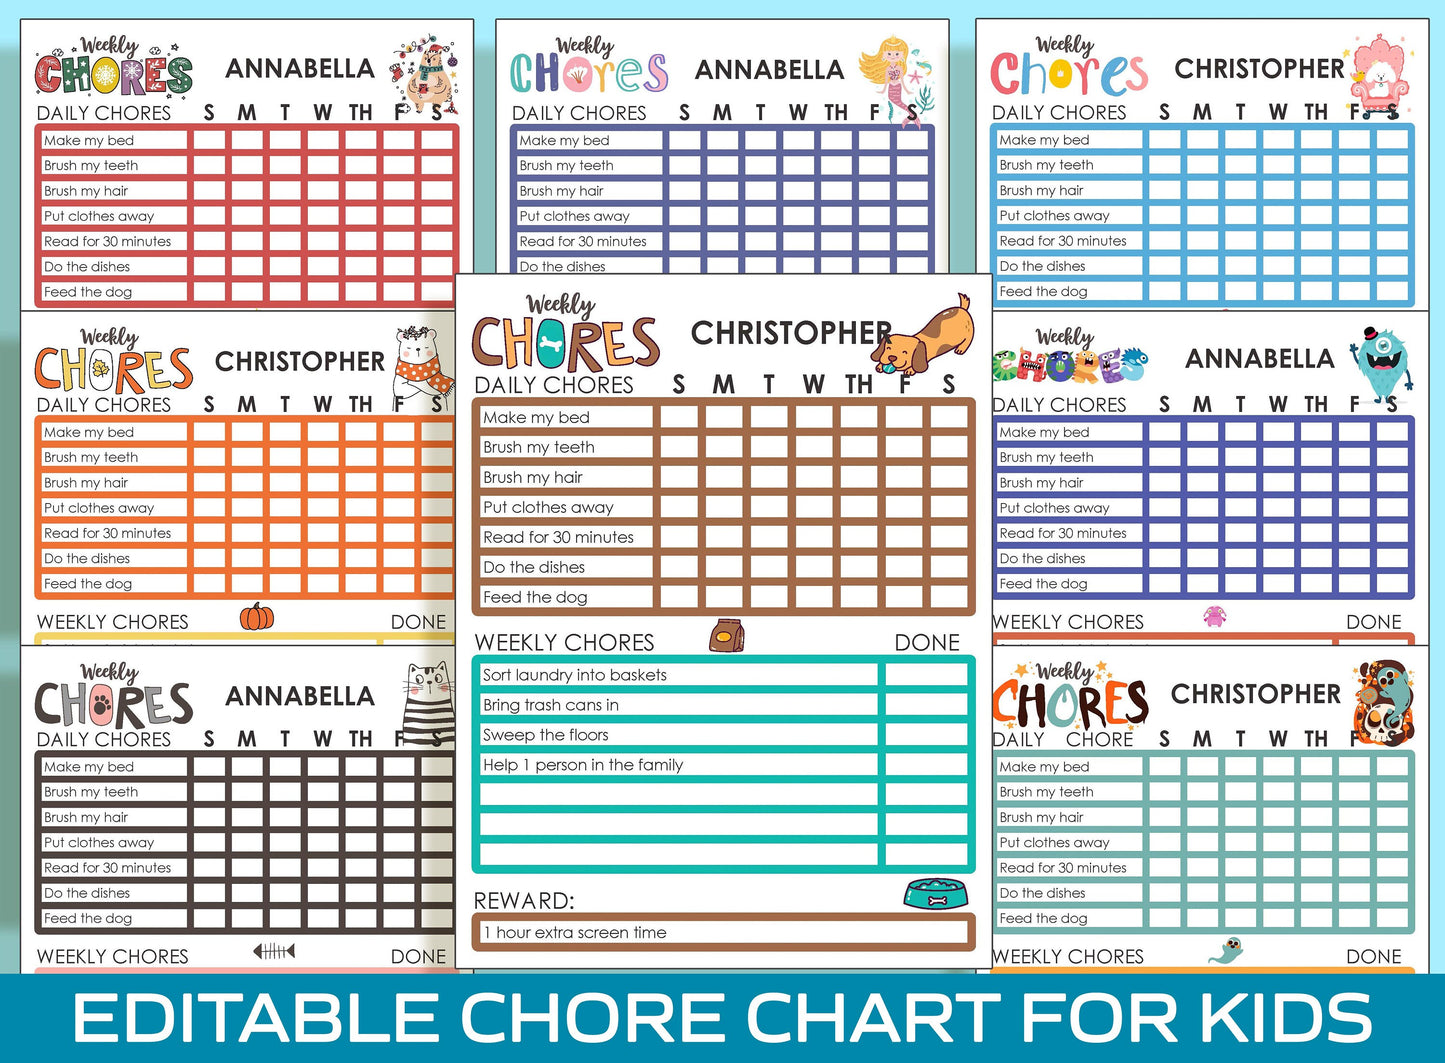 Fun and Functional Chore Chart for Teens: 8 Adorable Designs, Printable and Editable PDFs for Instant Download